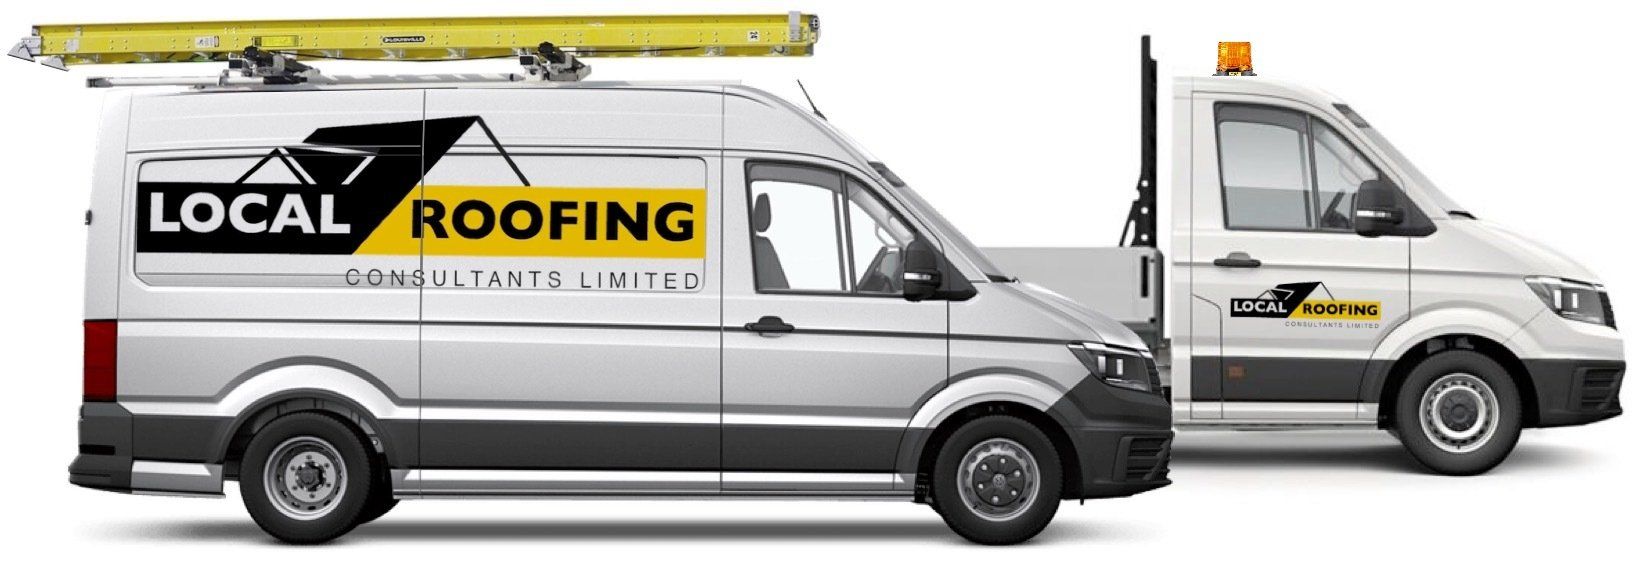 Local Roofing Consultants Limited work in Finchley and throughout the London area